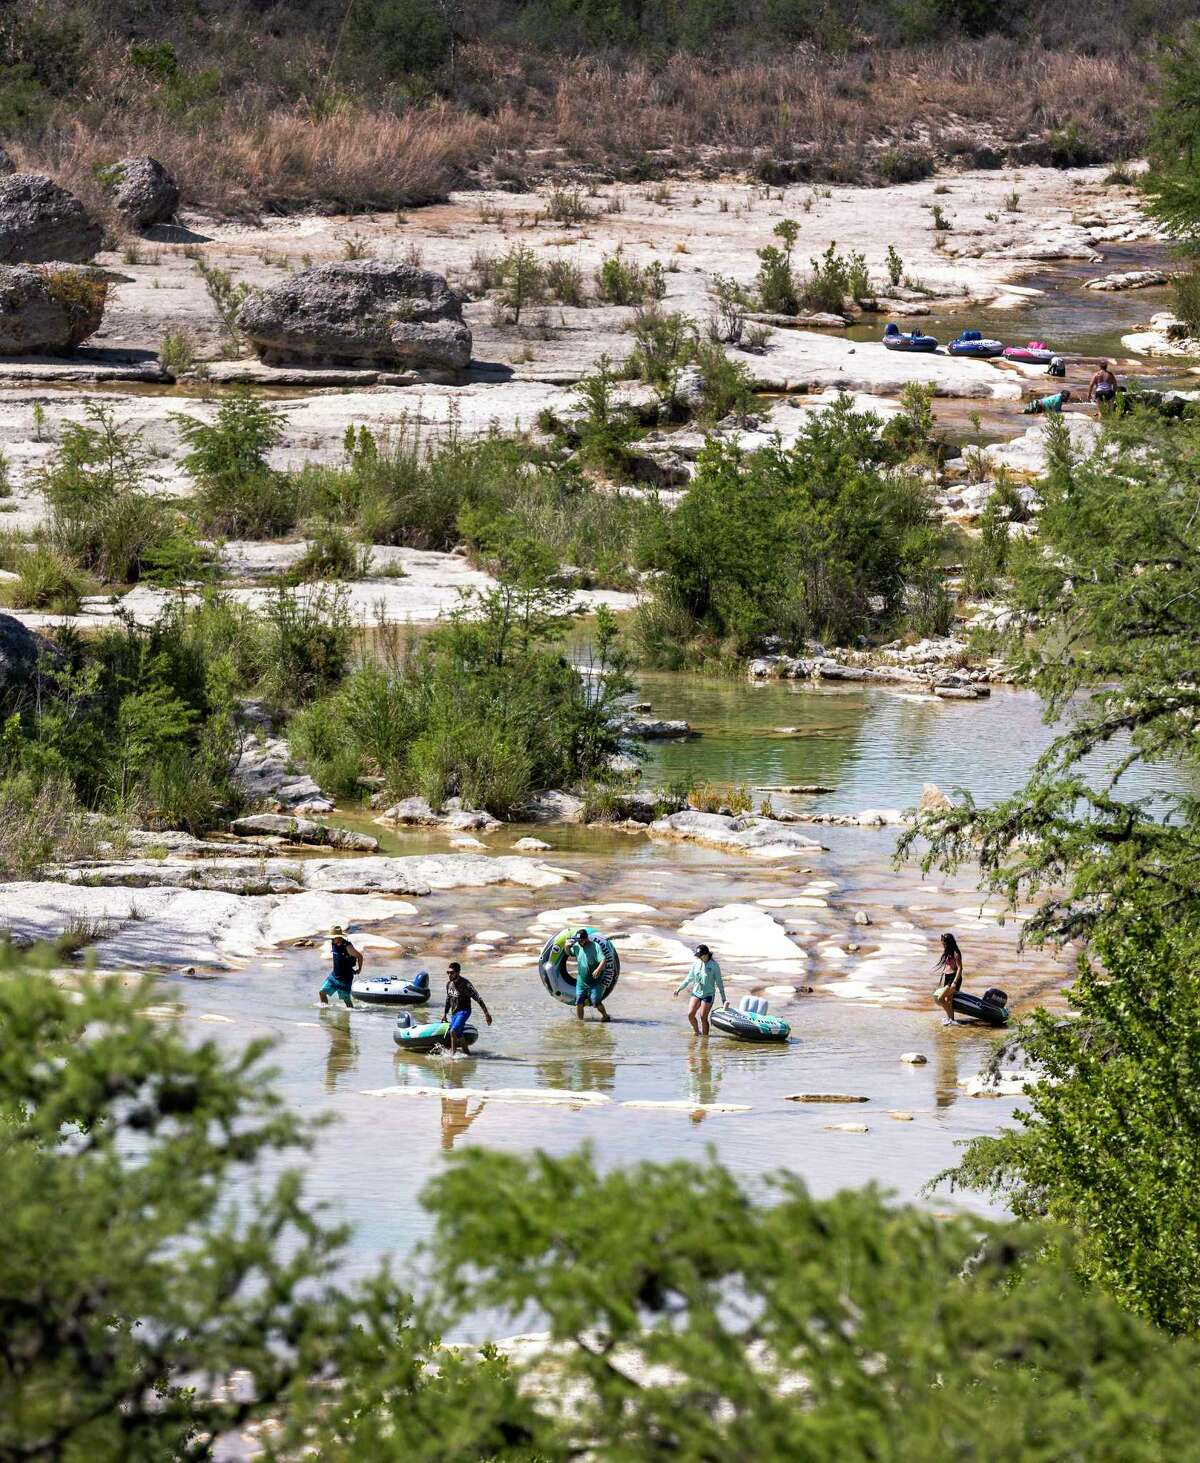 People carry inner tubes on June 23 along a nearly dry Frio River in Garner State Park. The U.S. Geological Survey’s river gauge in Concan measured zero flow in the river that day.